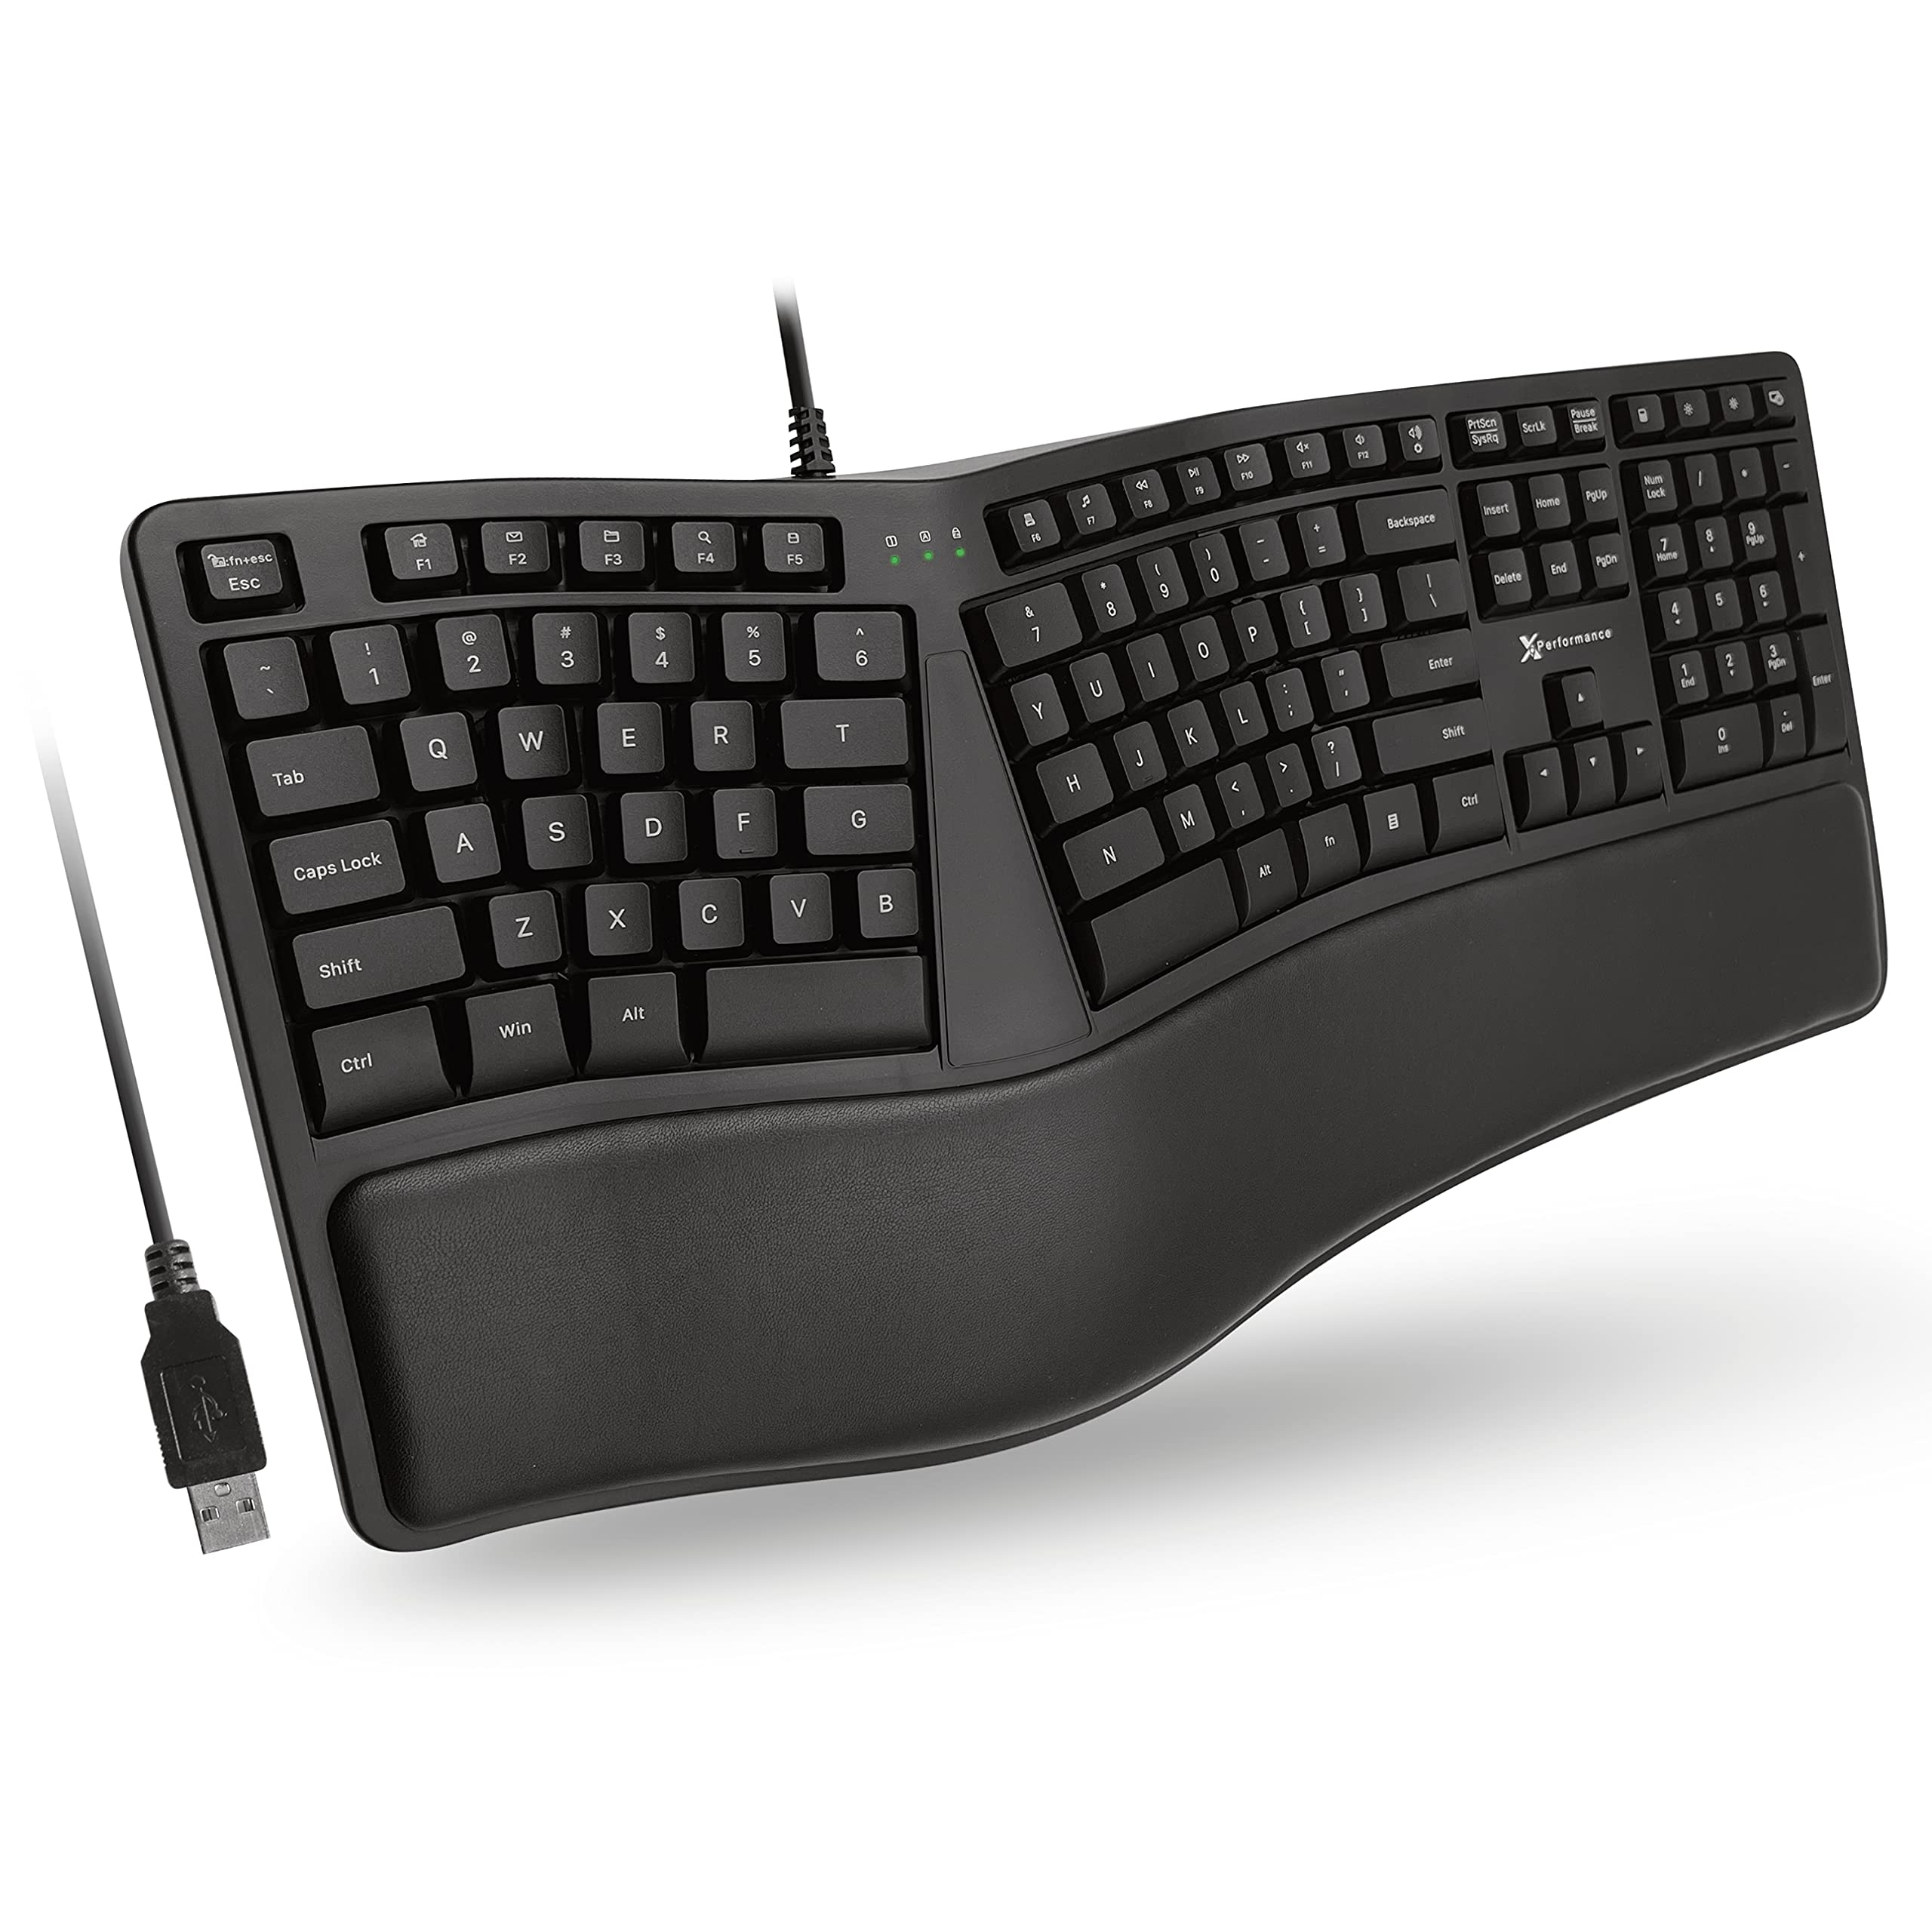 Alternate keyboards with troubleshooting options